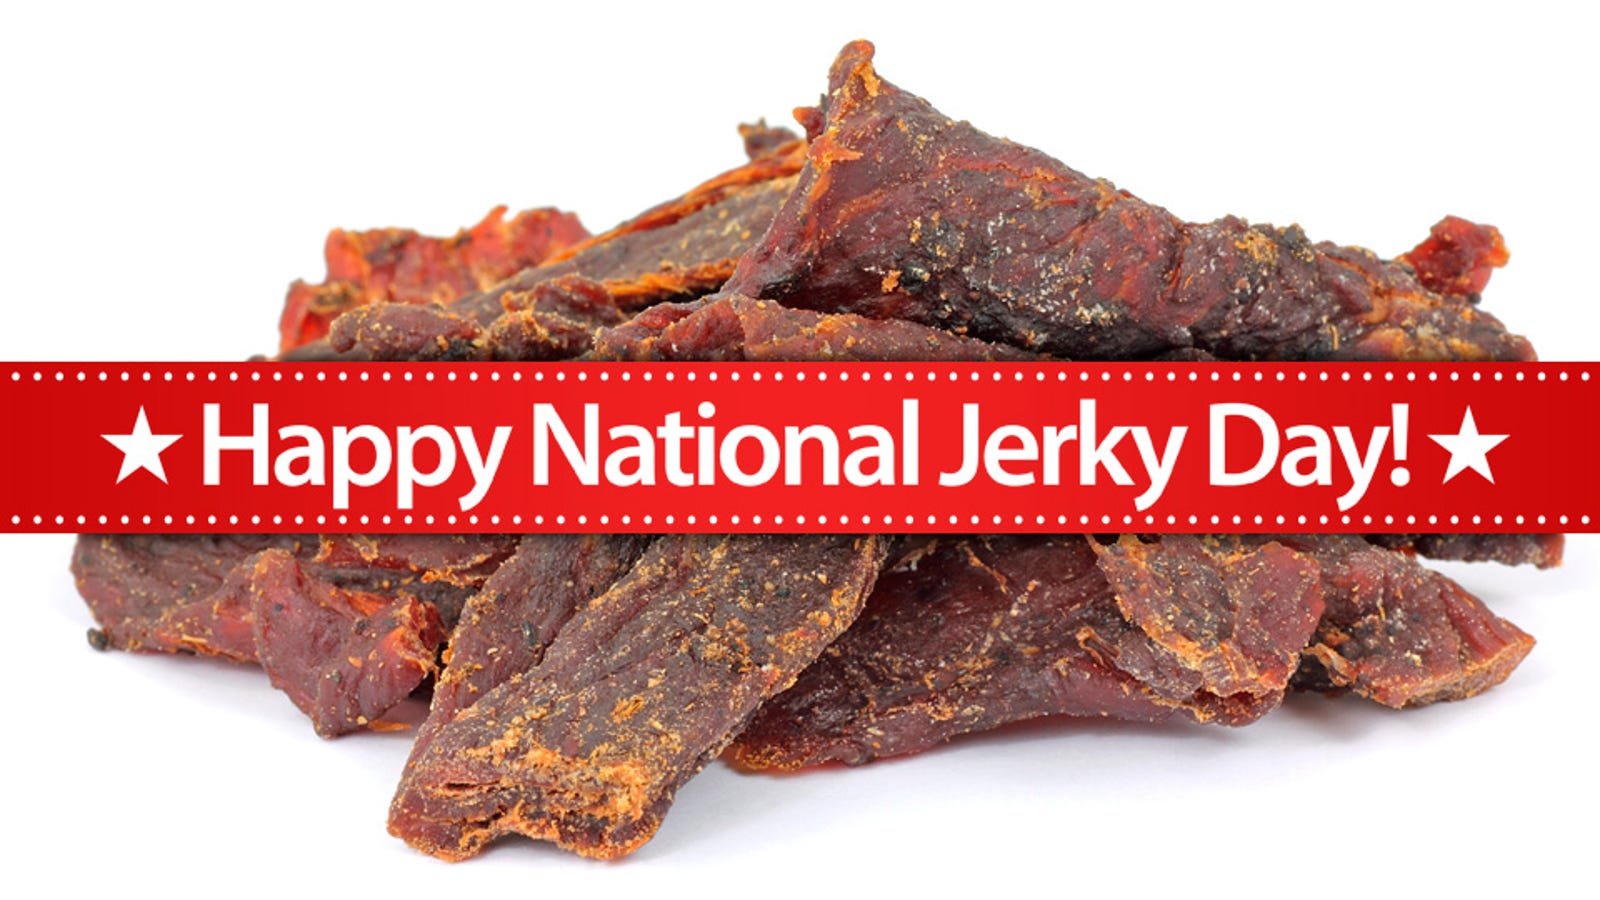 Everything You Need To Celebrate the First Inaugural National Jerky Day